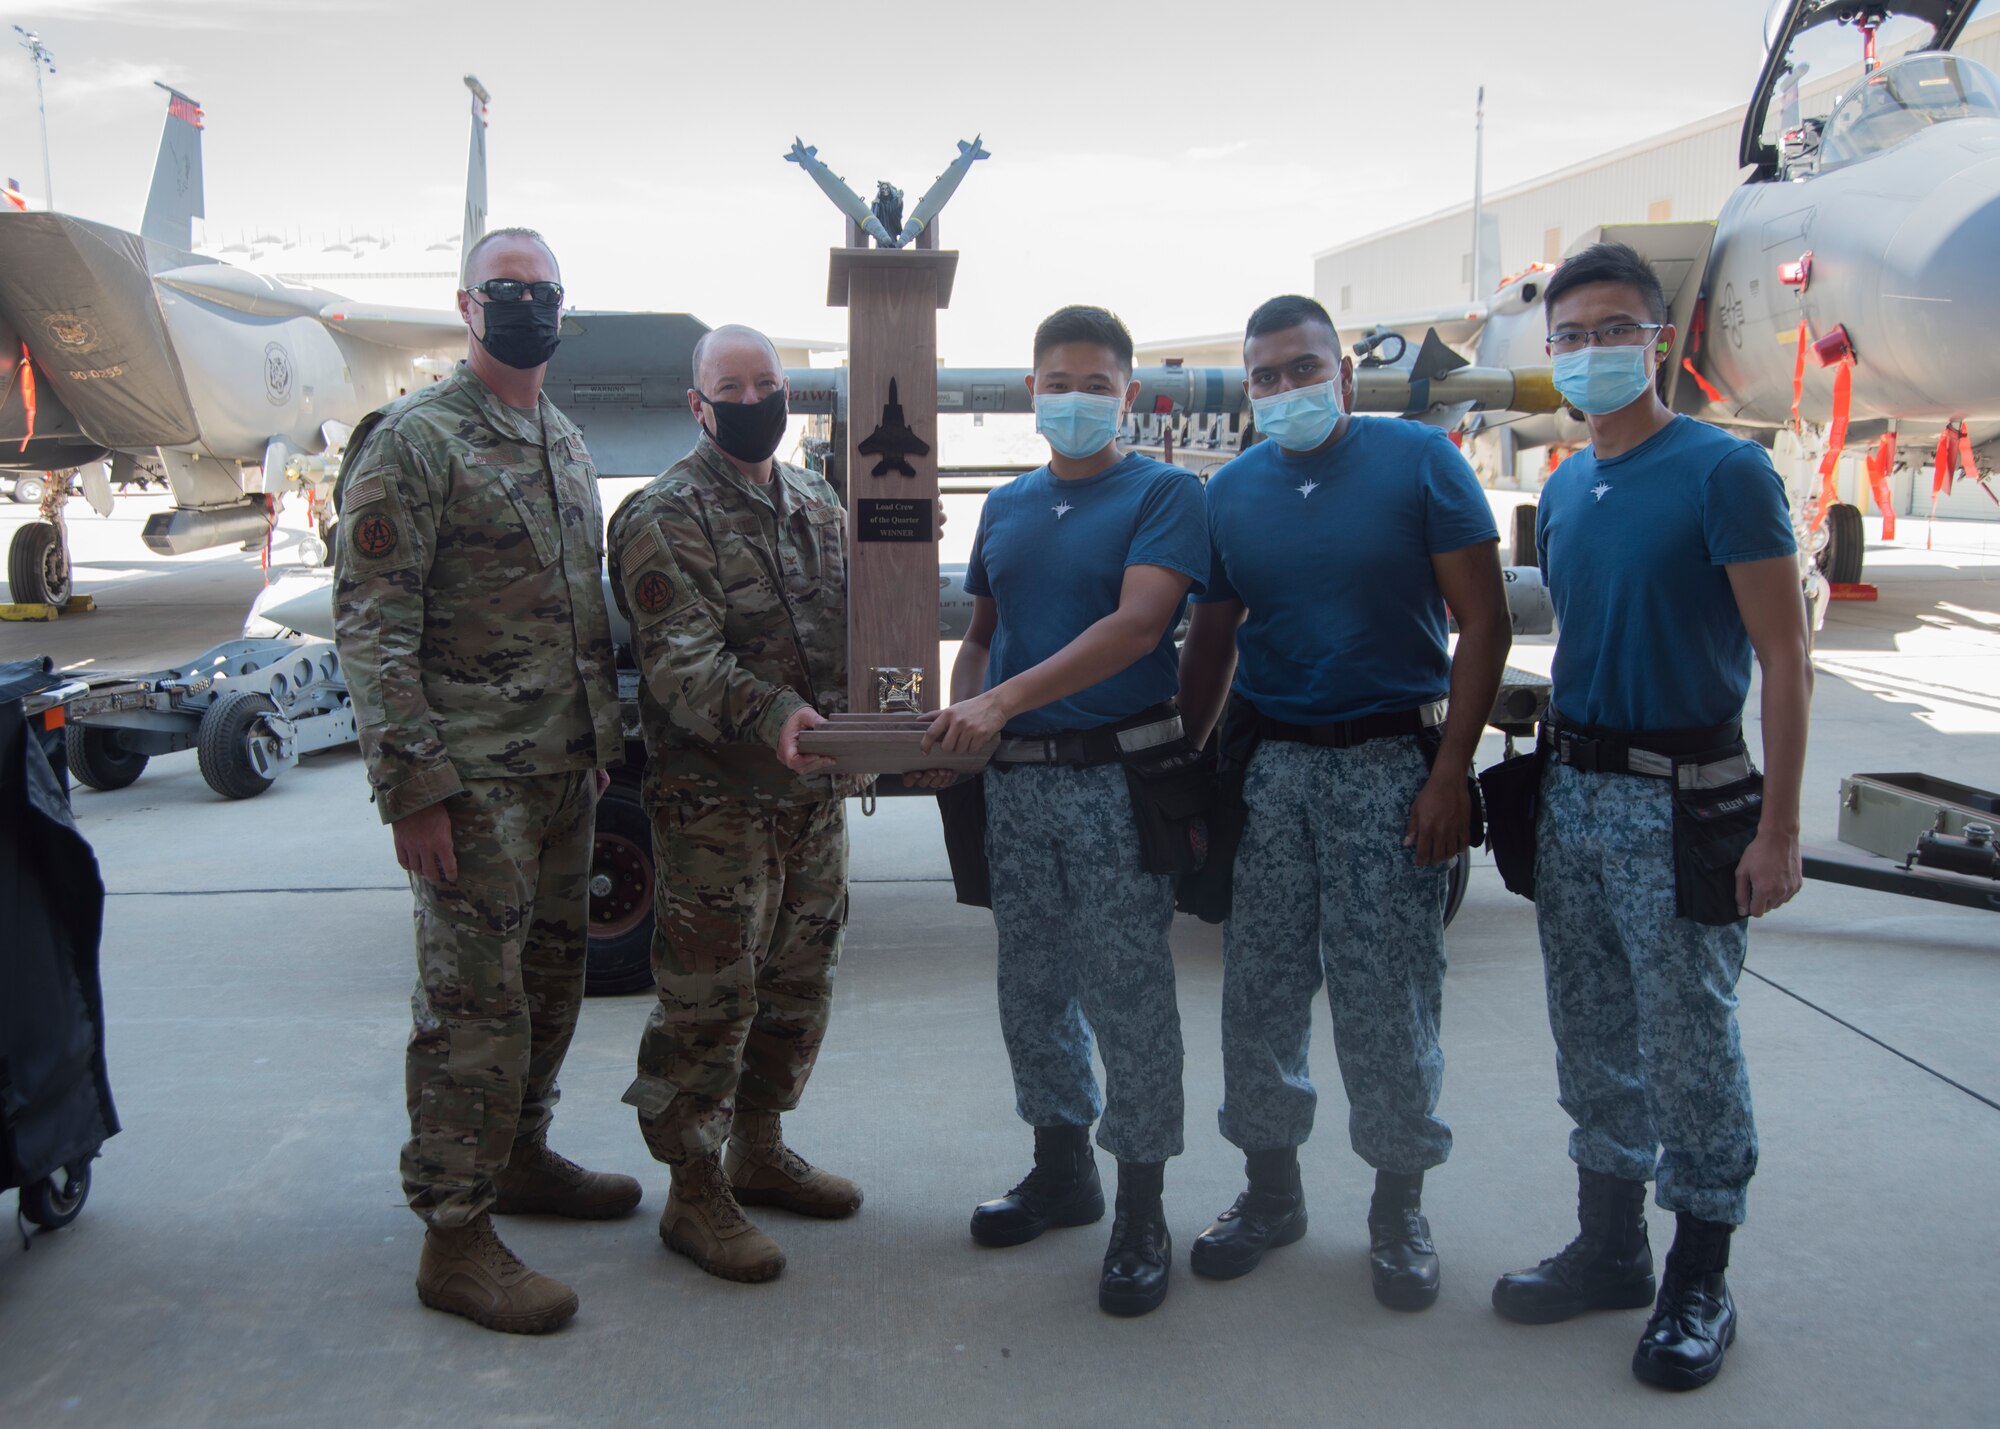 Two Airmen from the United States Air Force and Three Airmen from Republic of Singapore Air Force pose for a photo with the Quarterly Load Crew Competition trophy.